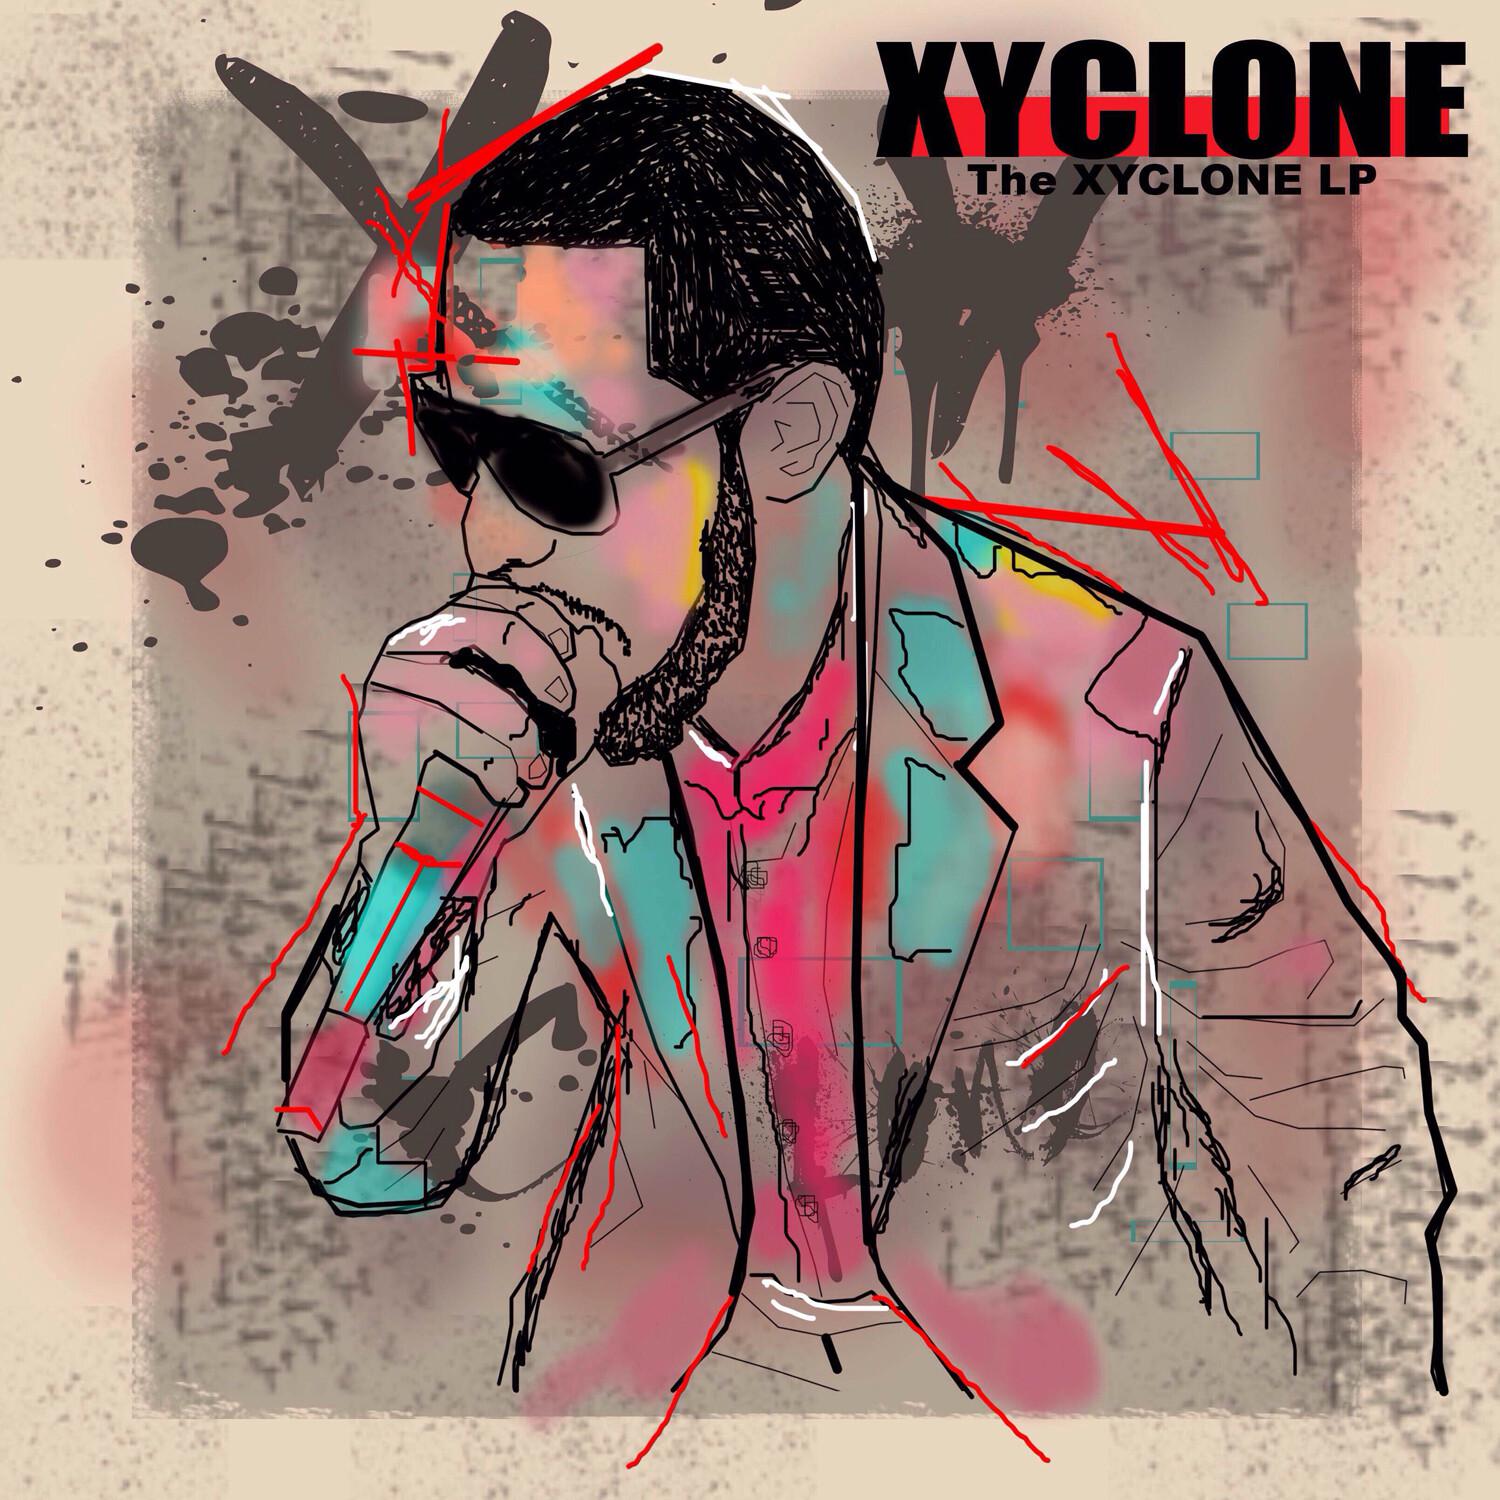 The Xyclone